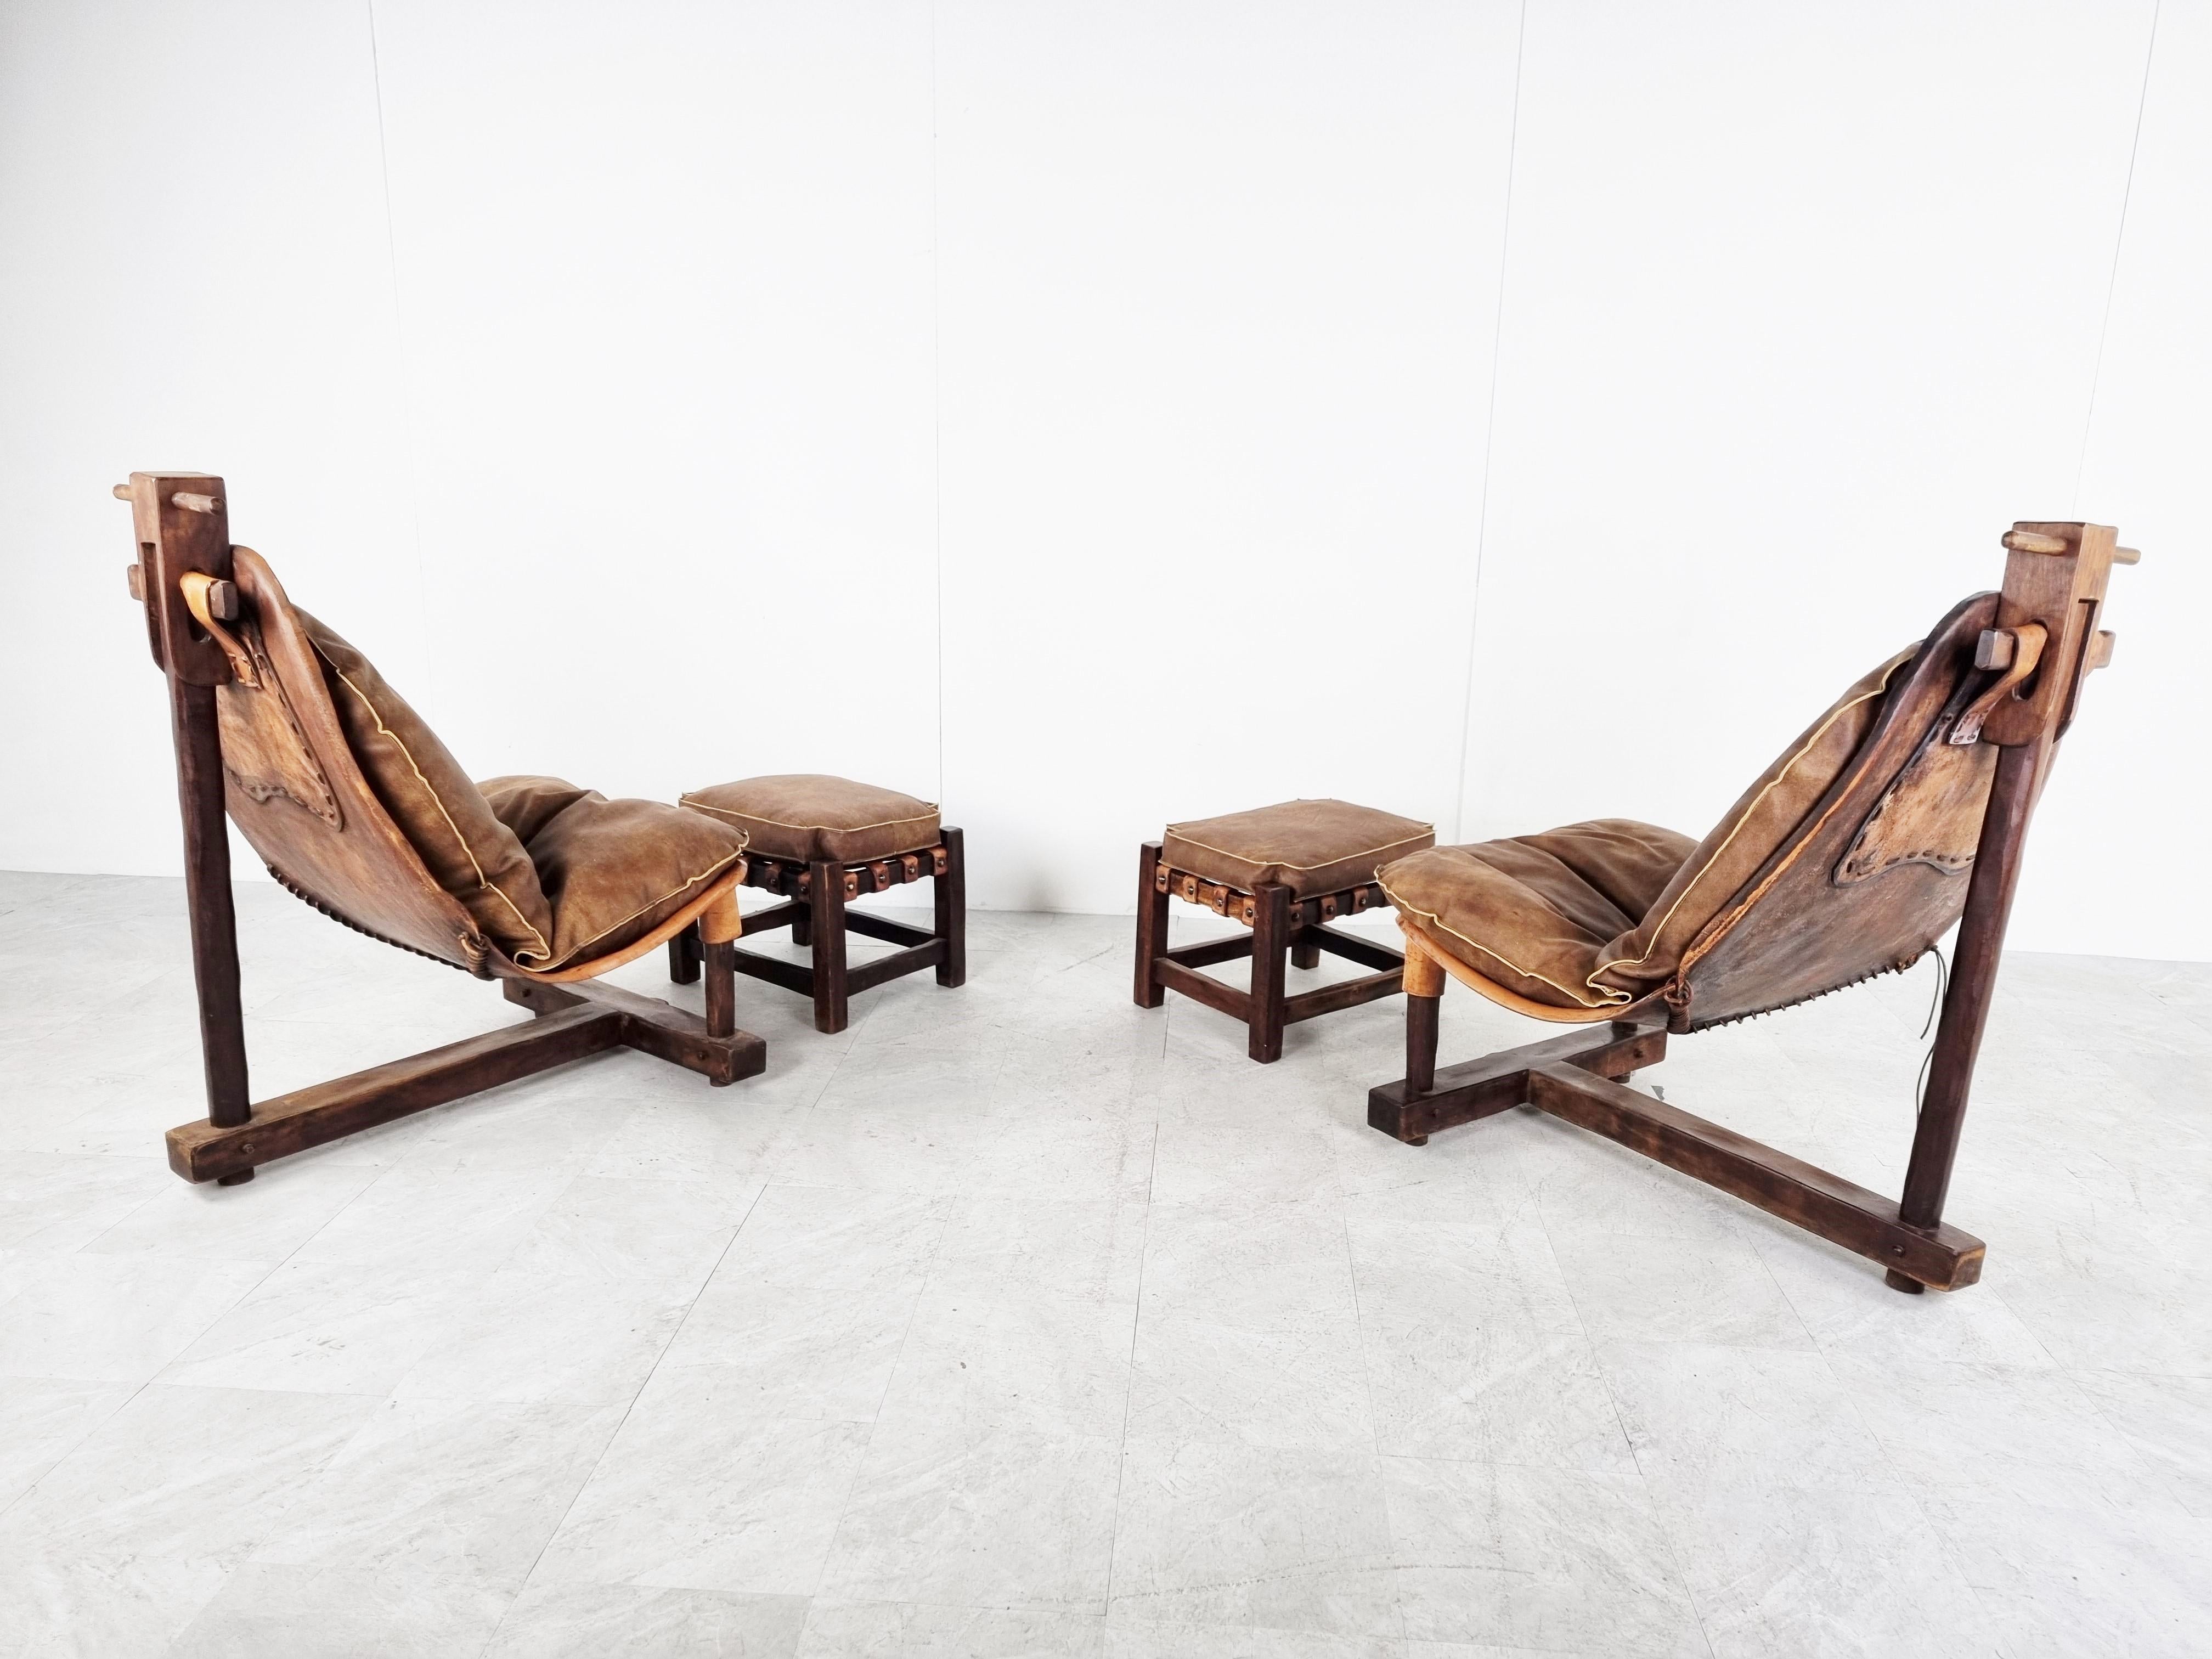 Brutalist Vintage Brazilian Lounge Chairs, 1960s Set of 2 For Sale